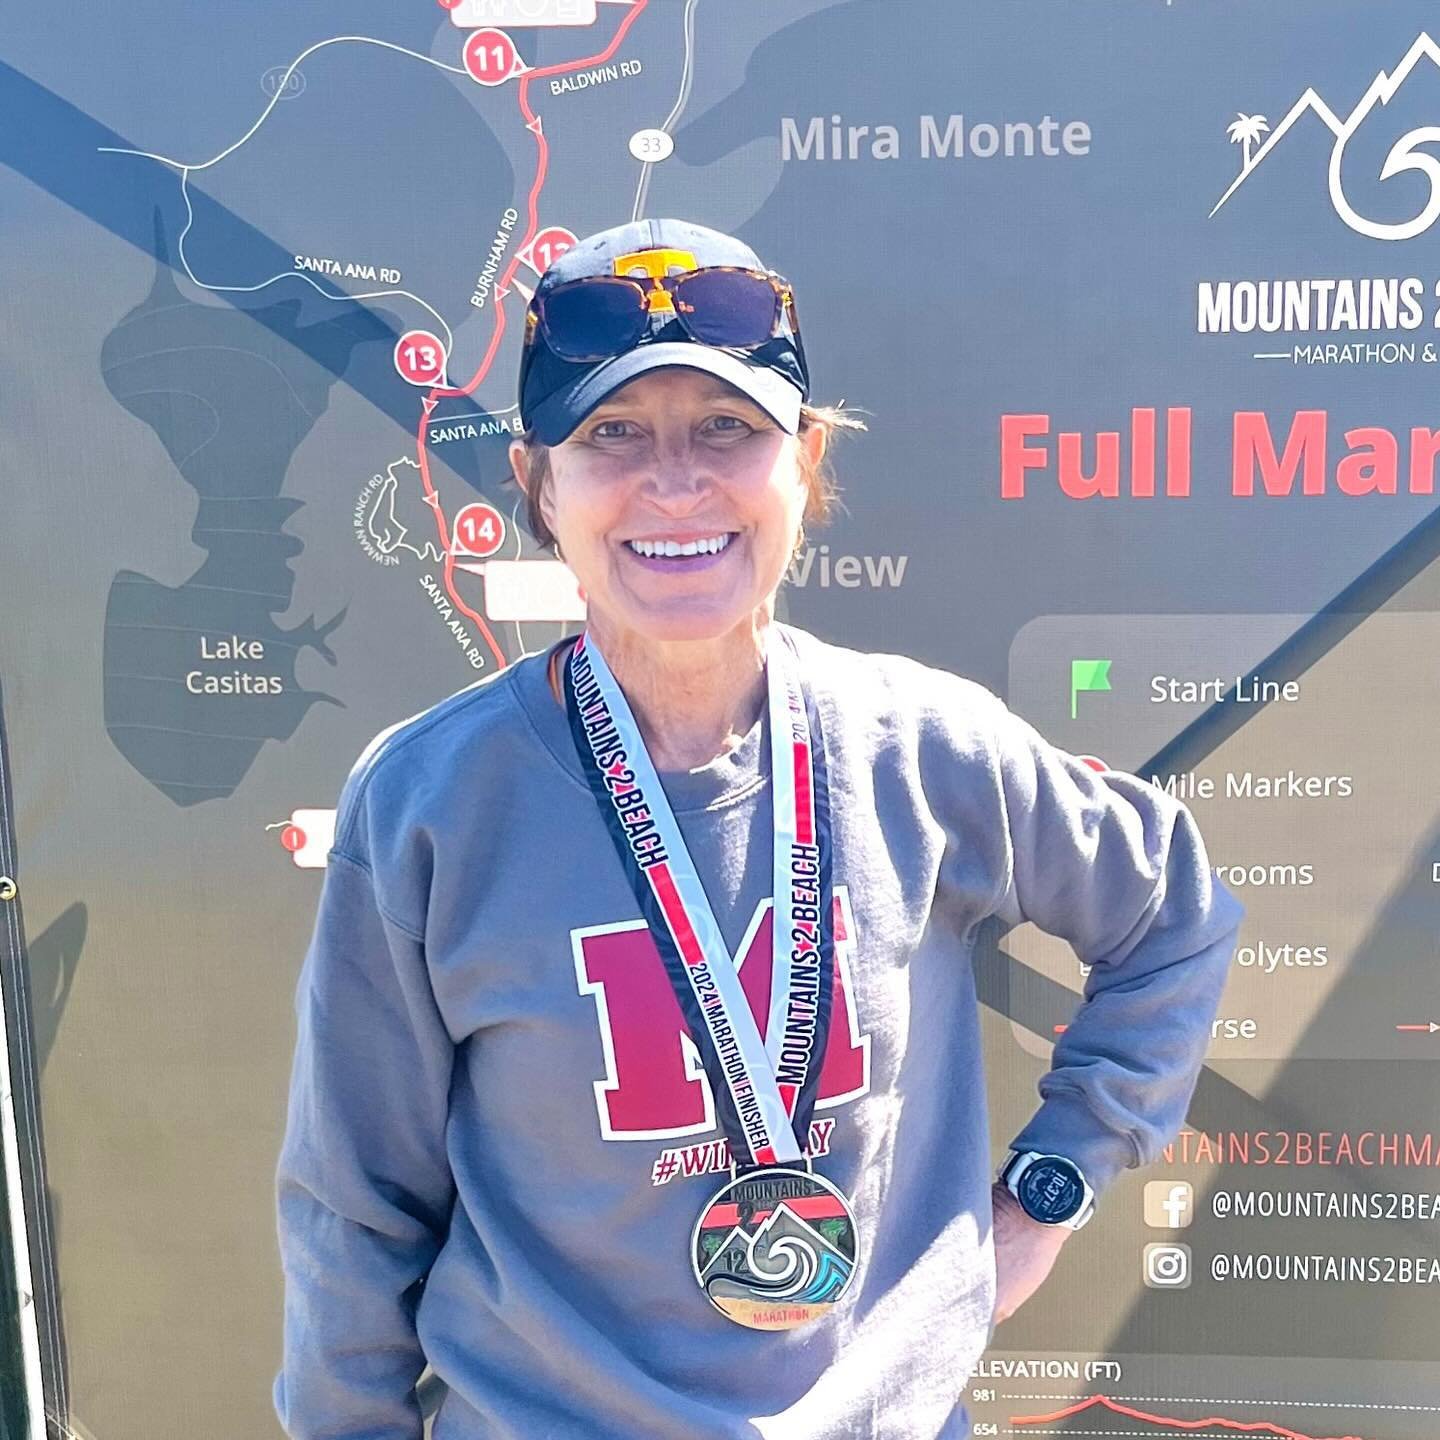 Let&rsquo;s hear it for Coach Jennifer! 🙌 She nailed her race at the Mountains to Beach Marathon, beat her time goal, qualified for Boston by 20 minutes and earned a 5th place age- group finish. Congrats Jennifer! 
👊💪🙌🏆🦄

#cantstopendurance #ru